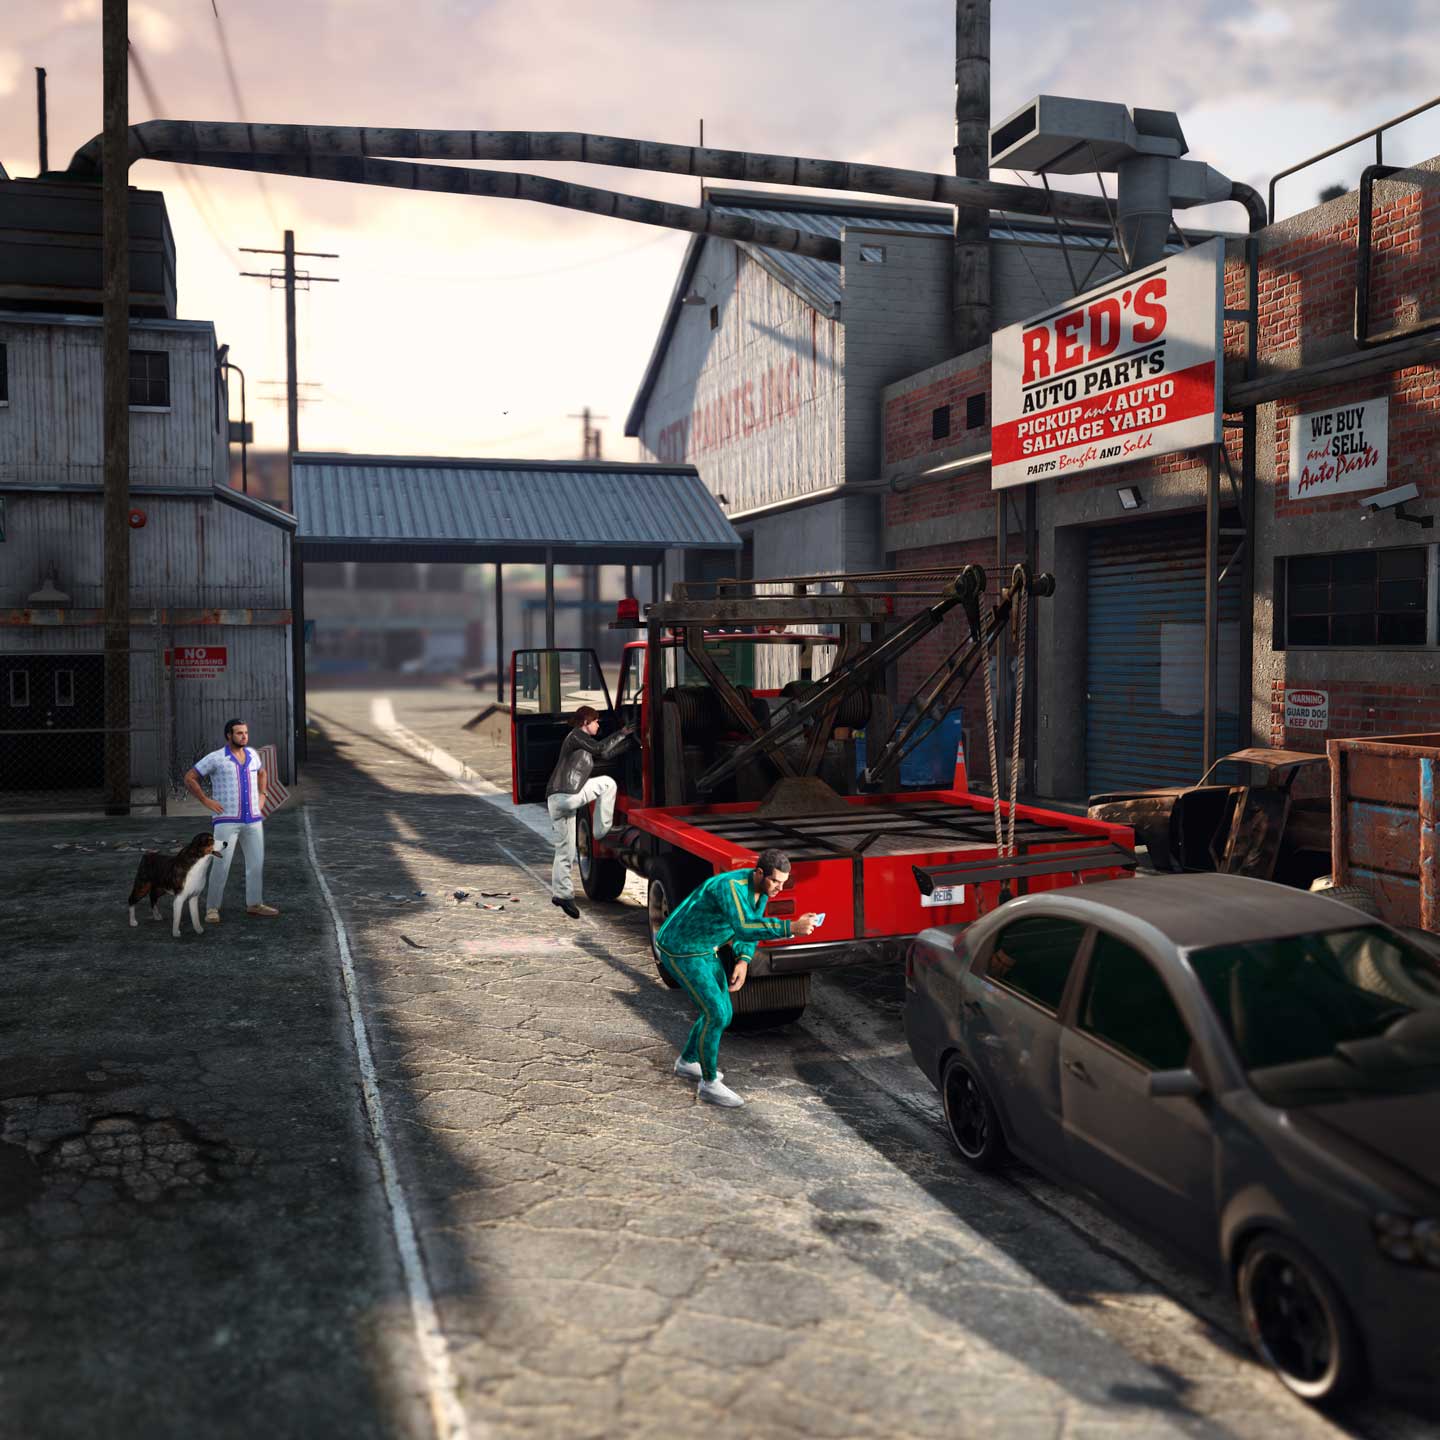 GTA Online: The Chop Shop Now Available - Rockstar Games